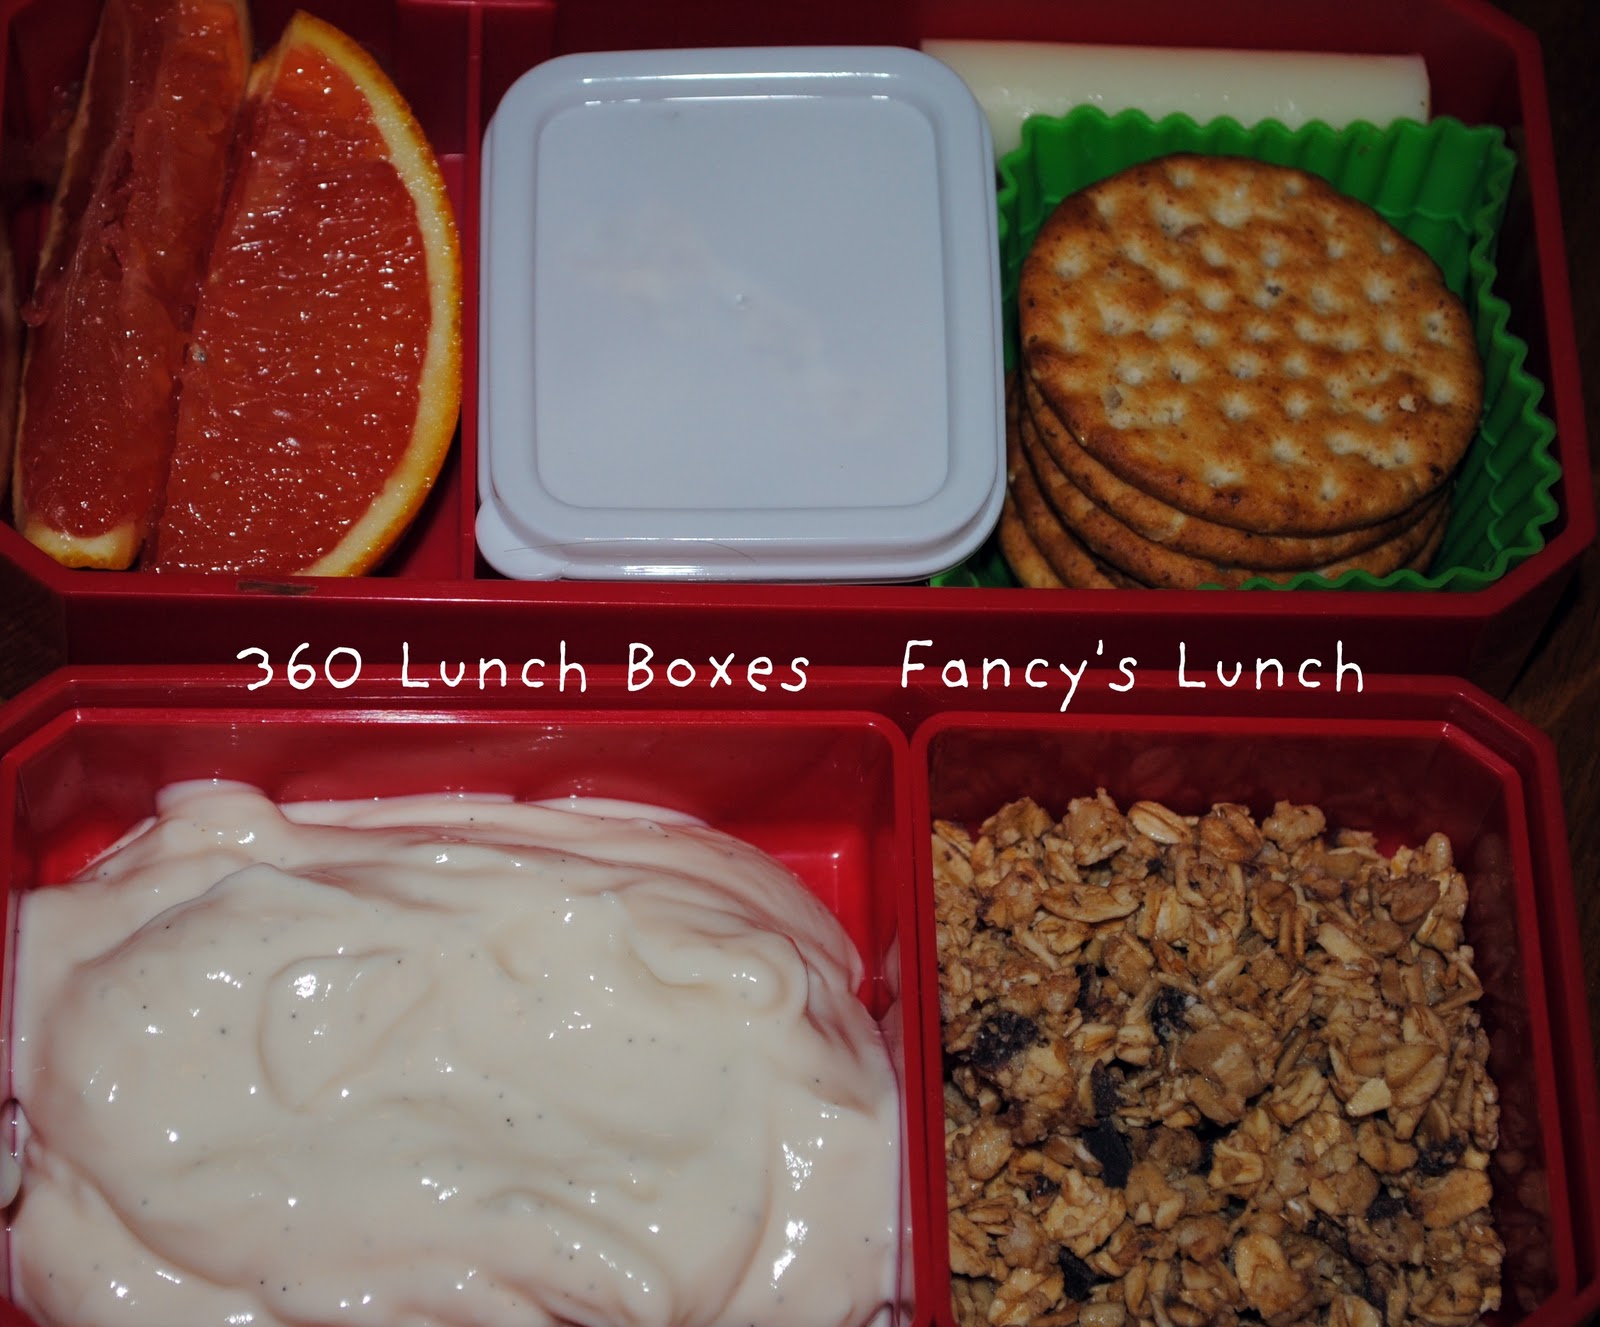 360 Lunch Boxes: Lunch for Tuesday